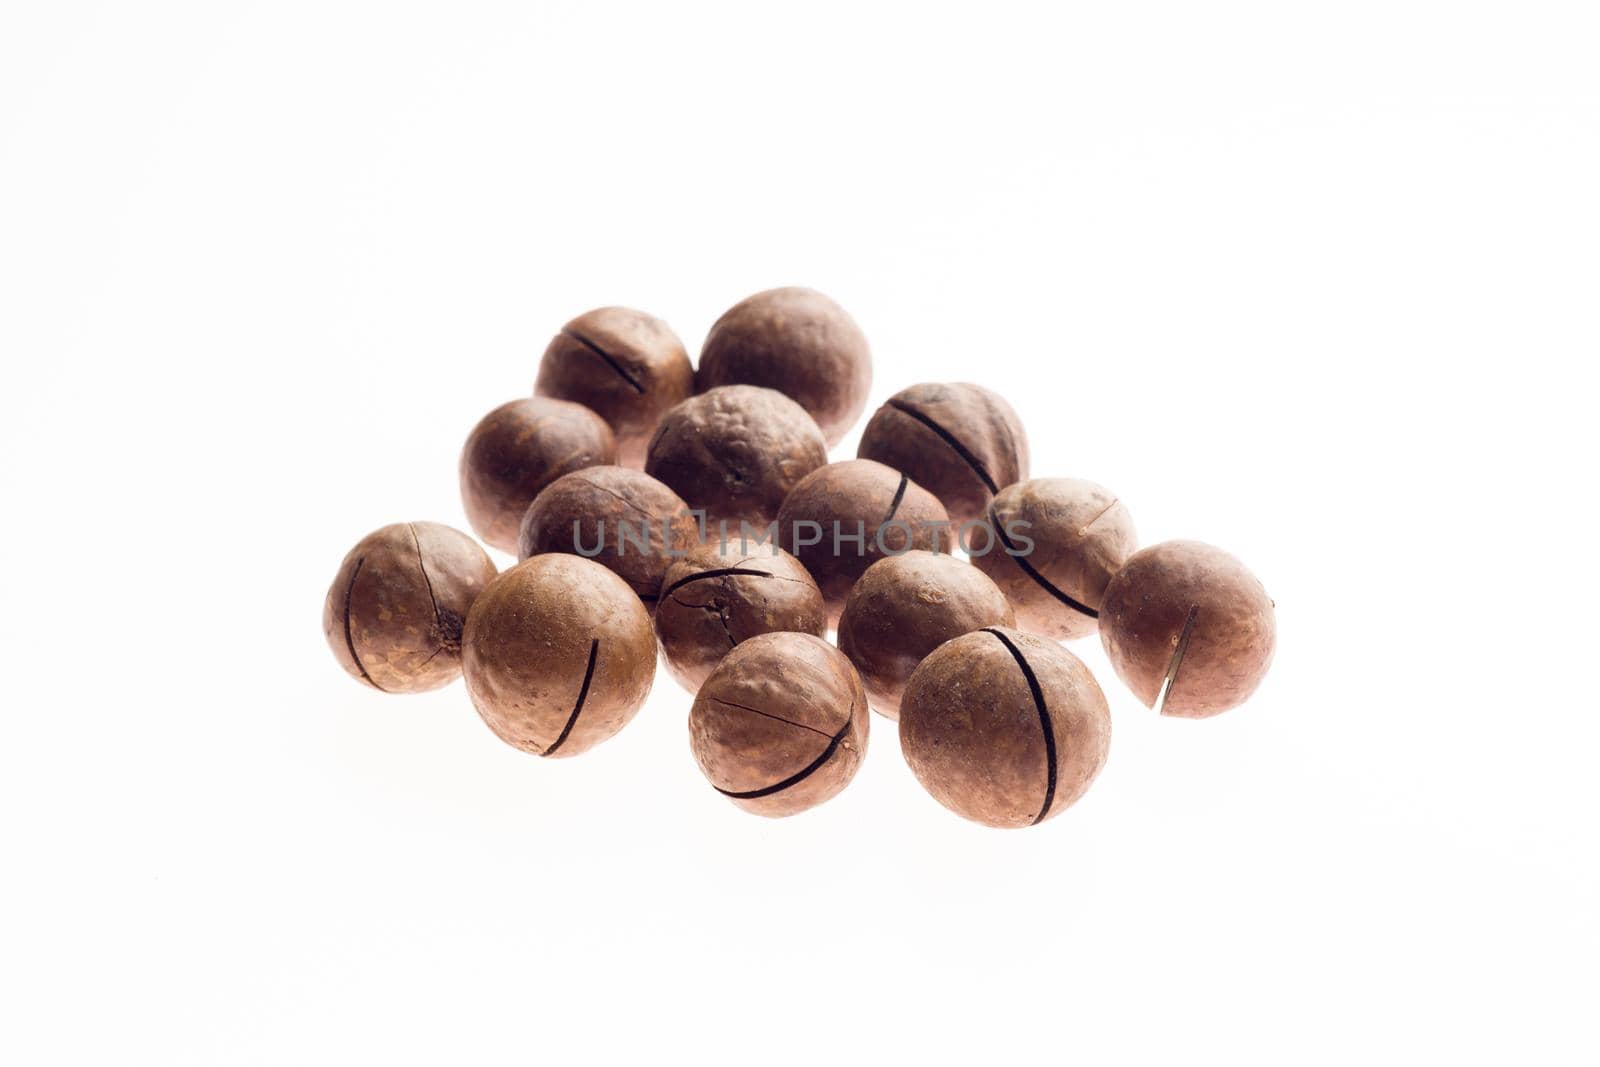 Closed macadamia nuts on a white background - image